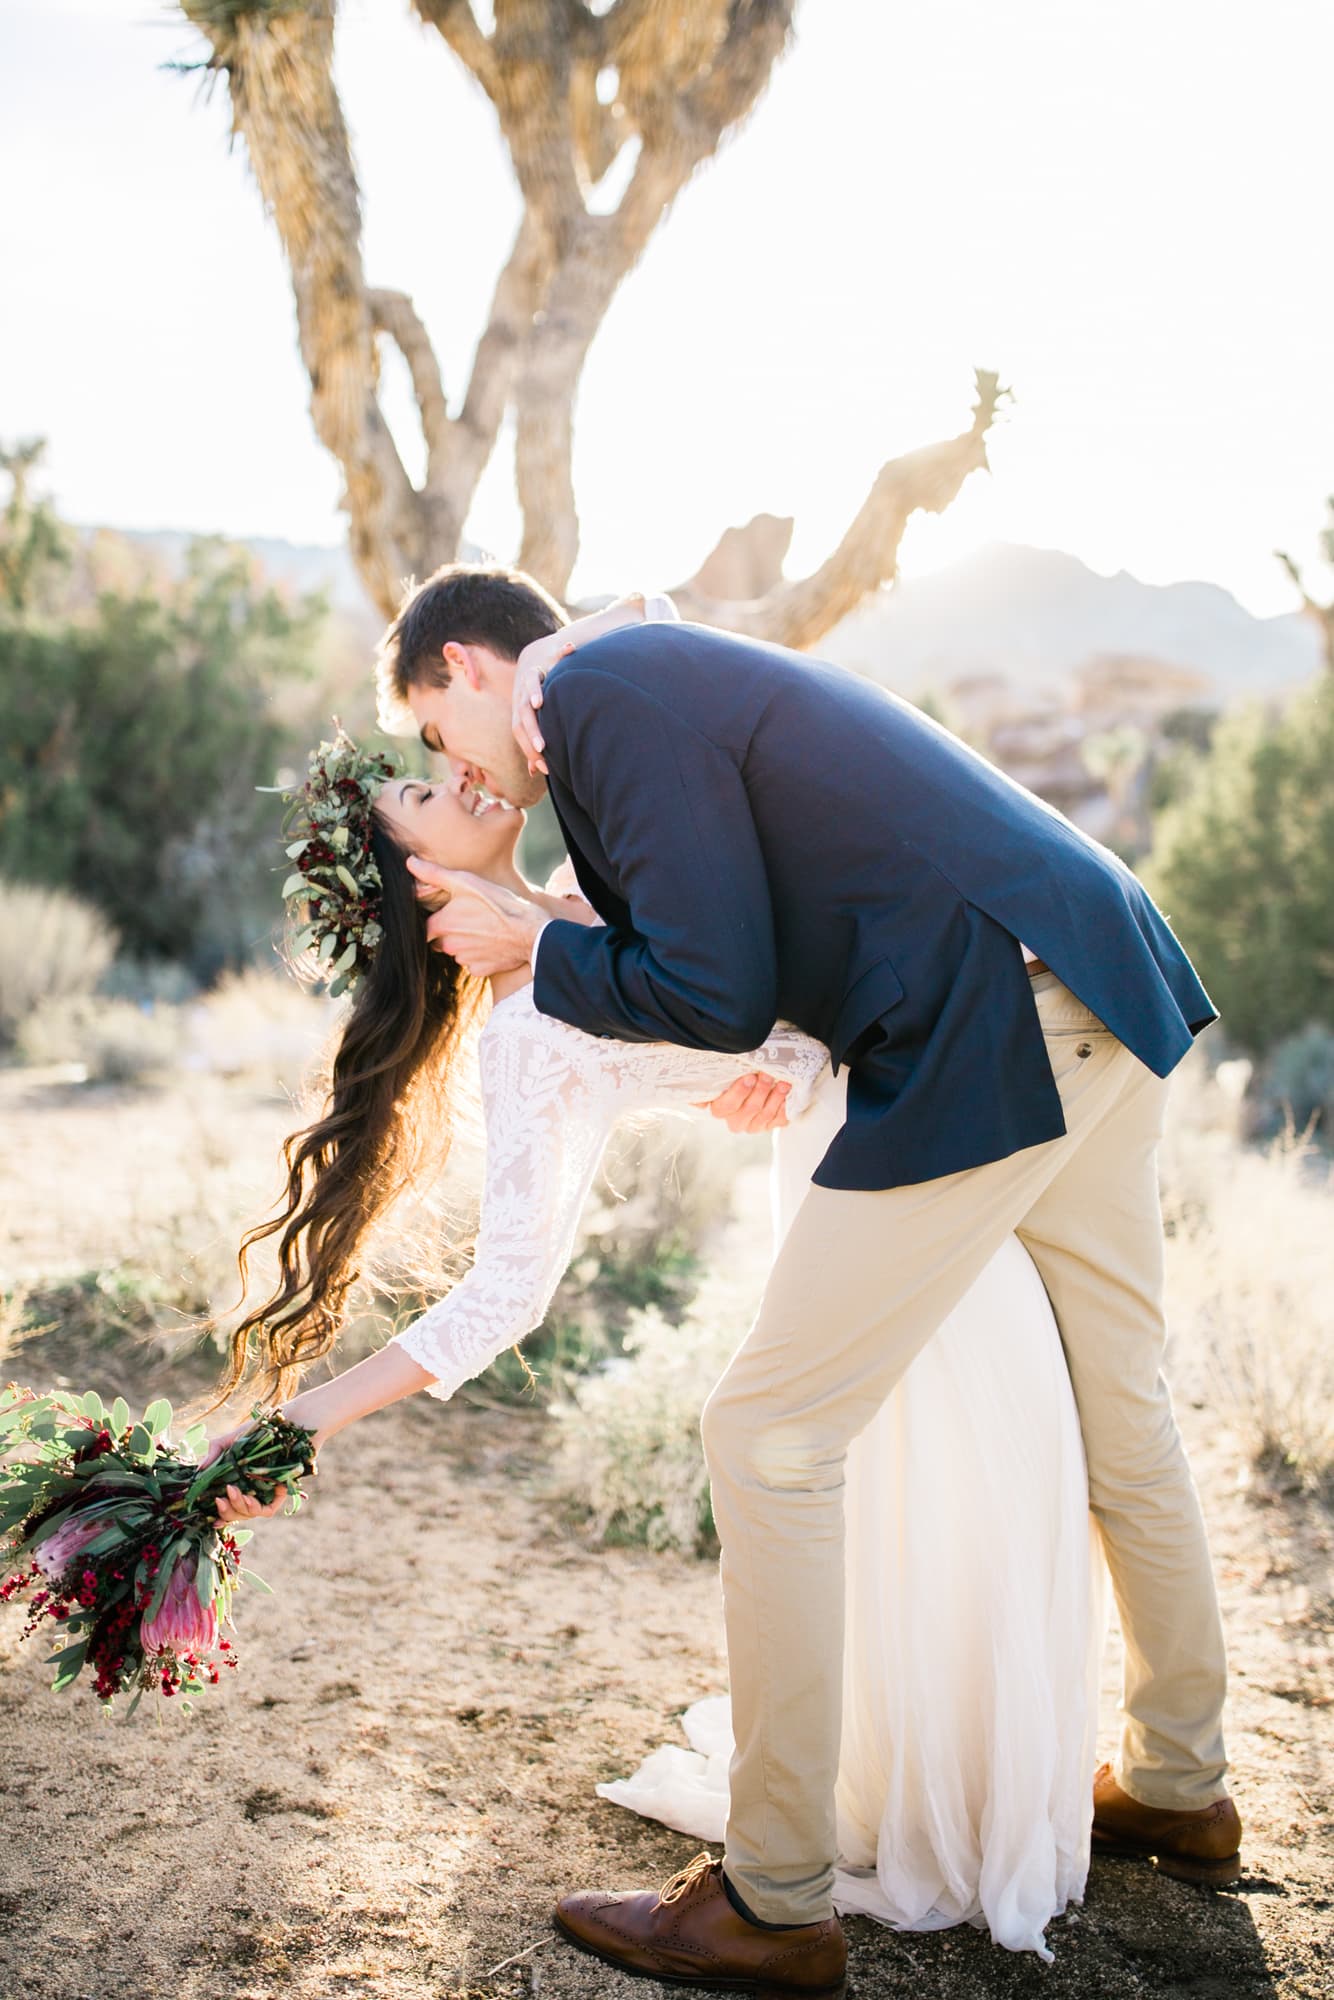 eloping couple celebrates with a first dance at sunset surrounded by joshua trees. the groom dips his bride as they smile.